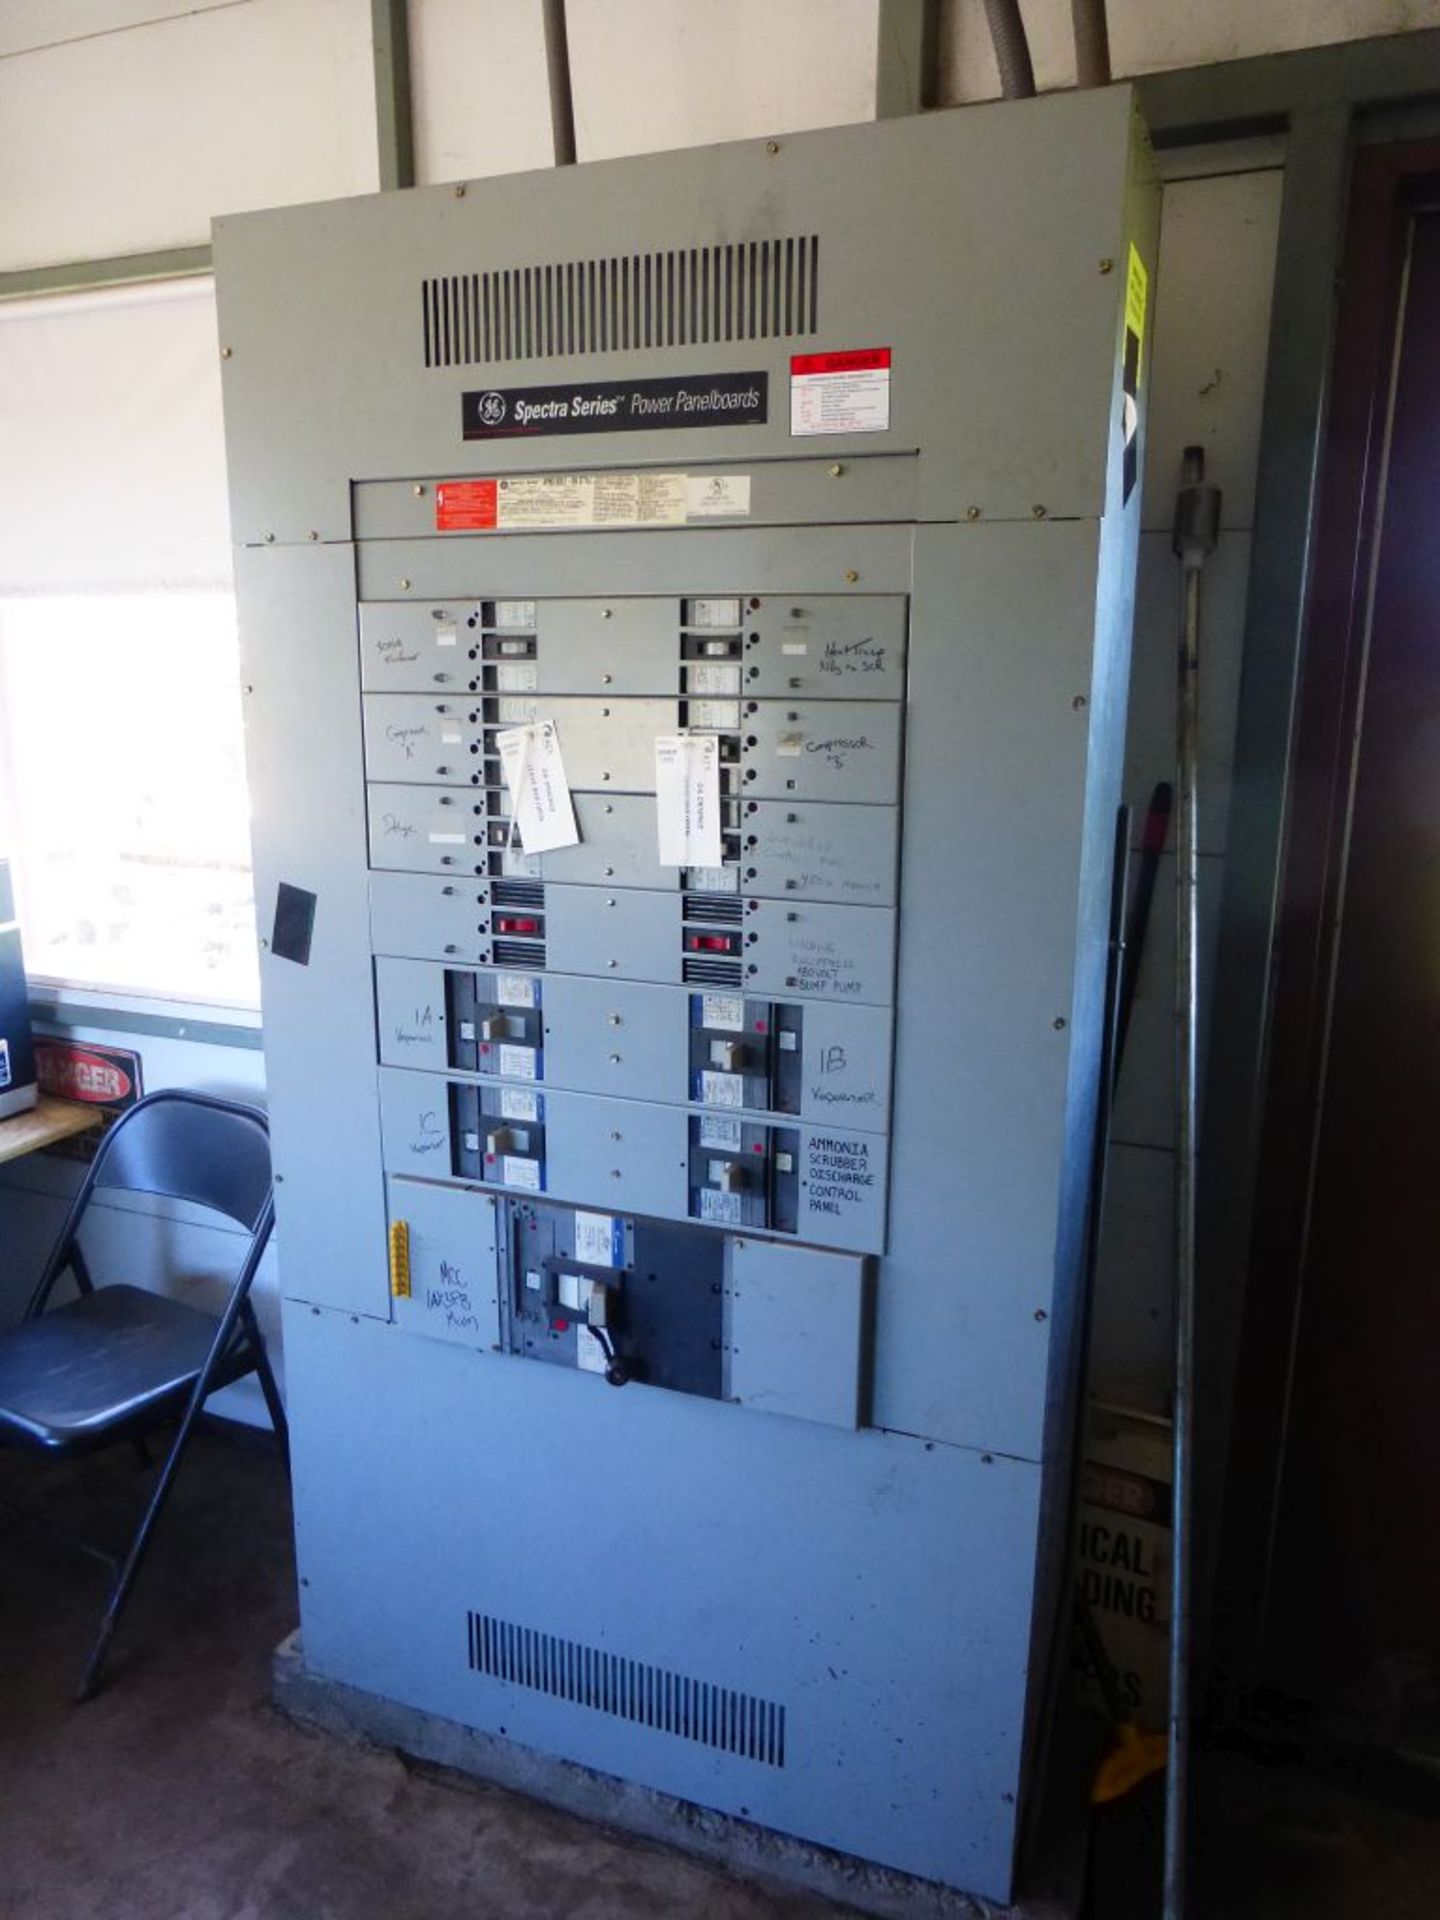 GE Spectra Series Panelboard | Circuit Breakers Include:; (1) 1200A; (3) 100A; (1) 25A; (3) 600A; (